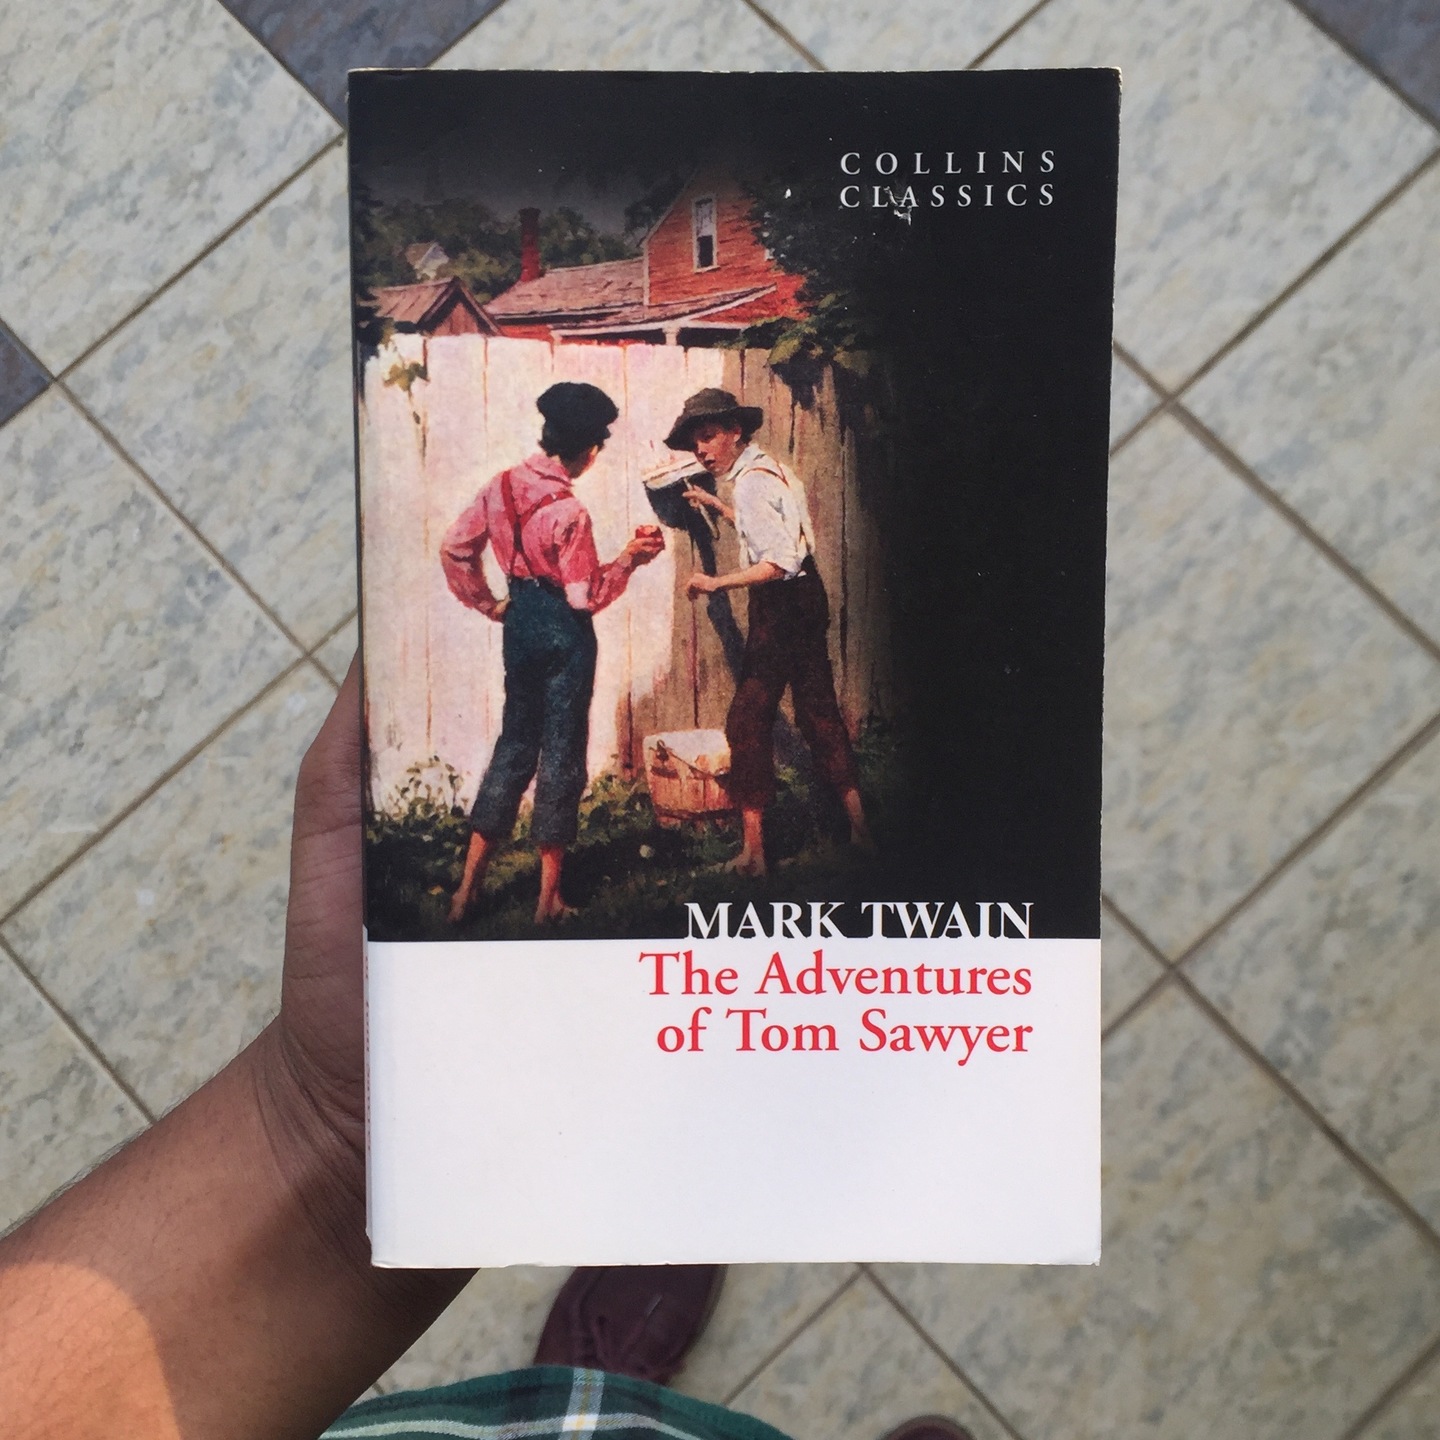 The Adventures of Tom Sawyer by Mark Twain [Paperback]